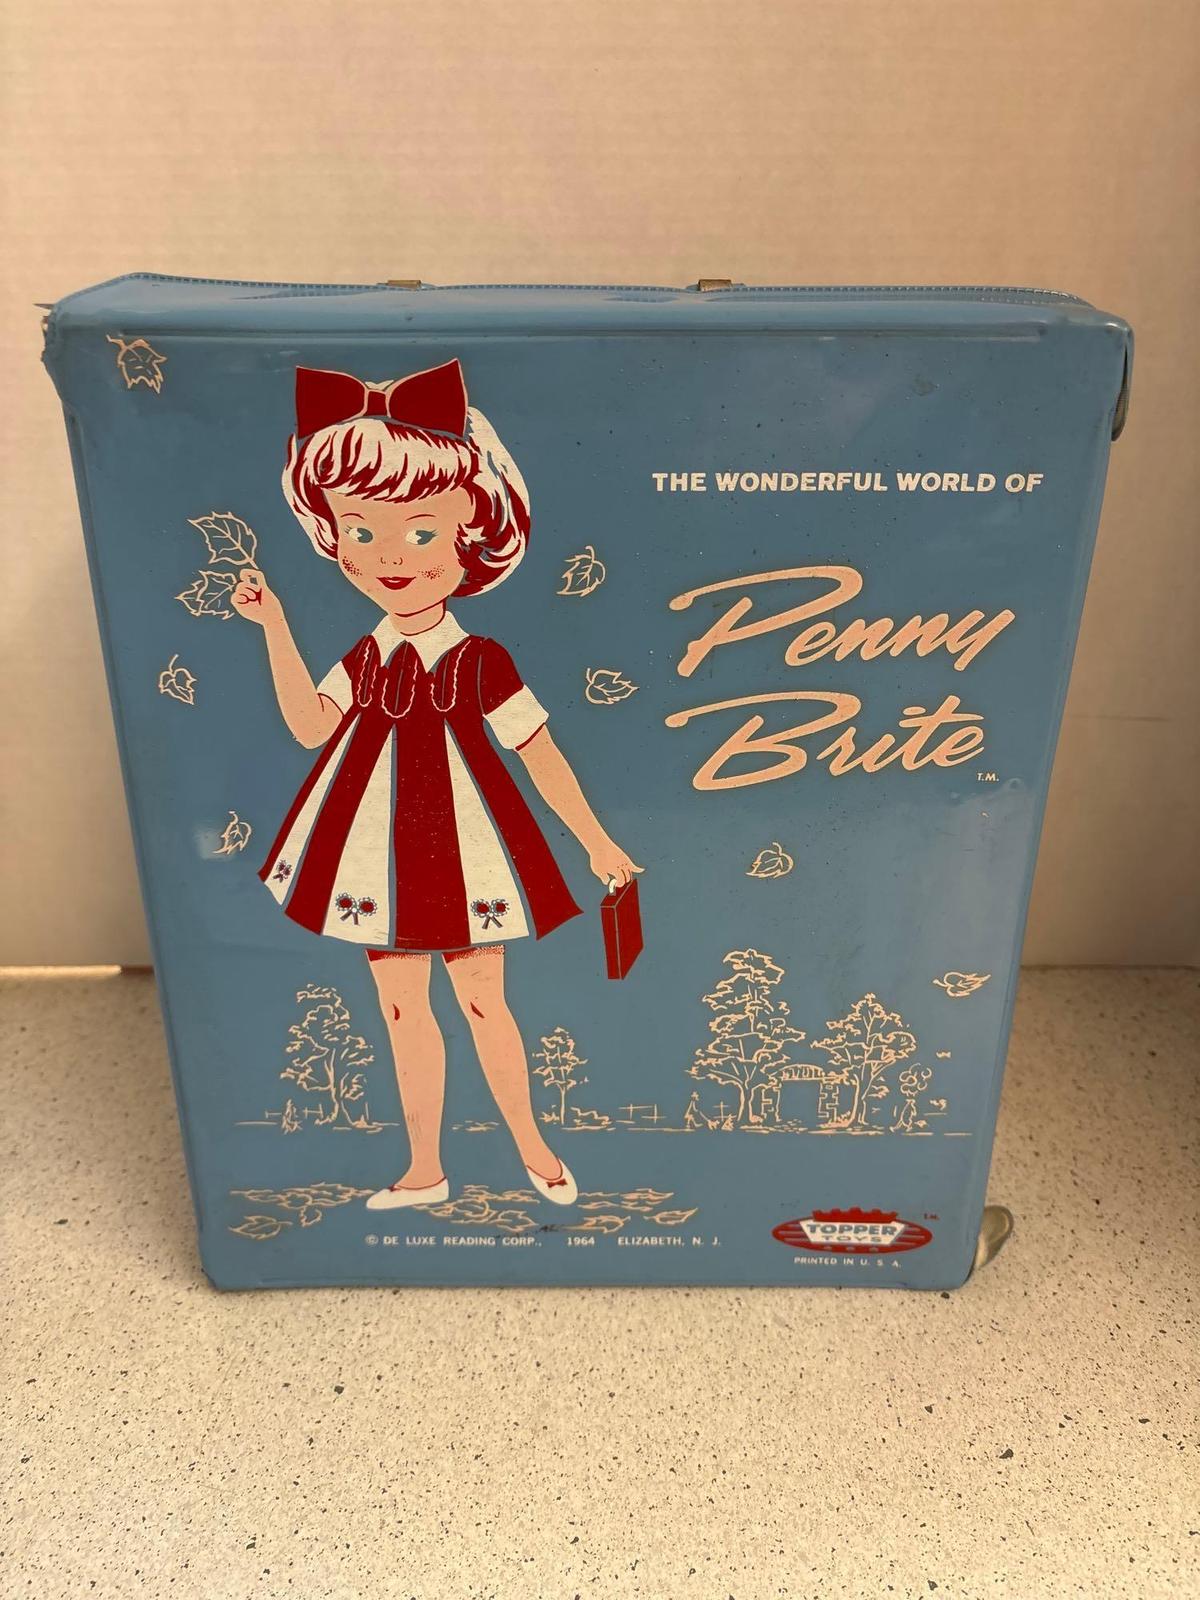 Topper Penny Brite Doll with accessories in case